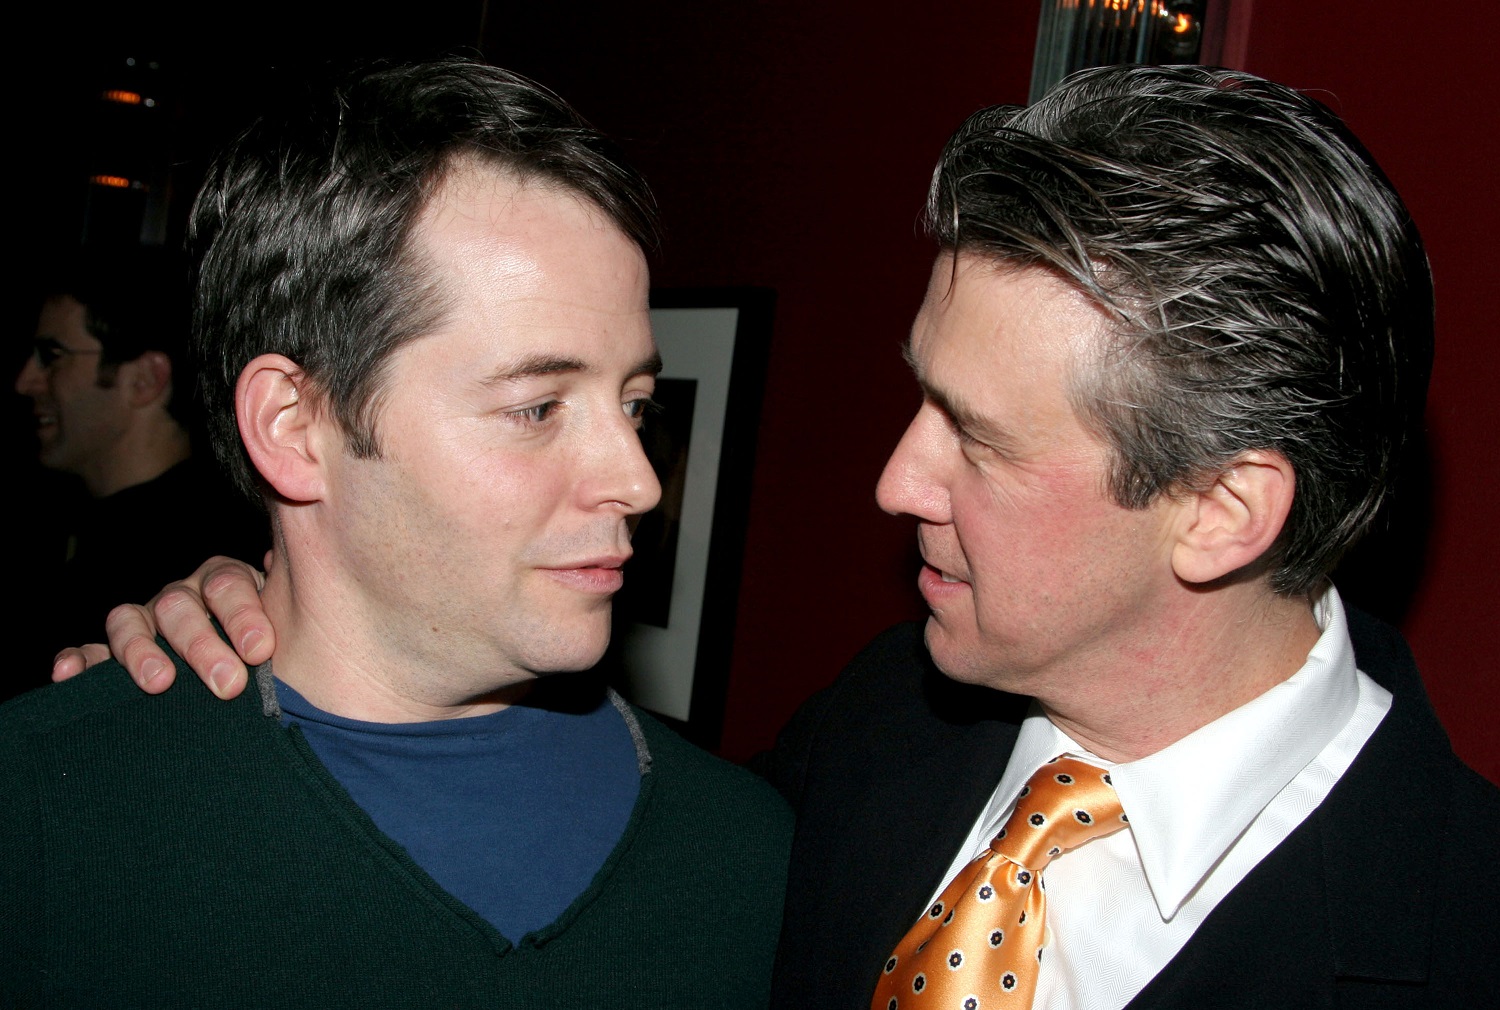 Matthew Broderick and Alan Ruck, who starred in Ferris Bueller's Day Off